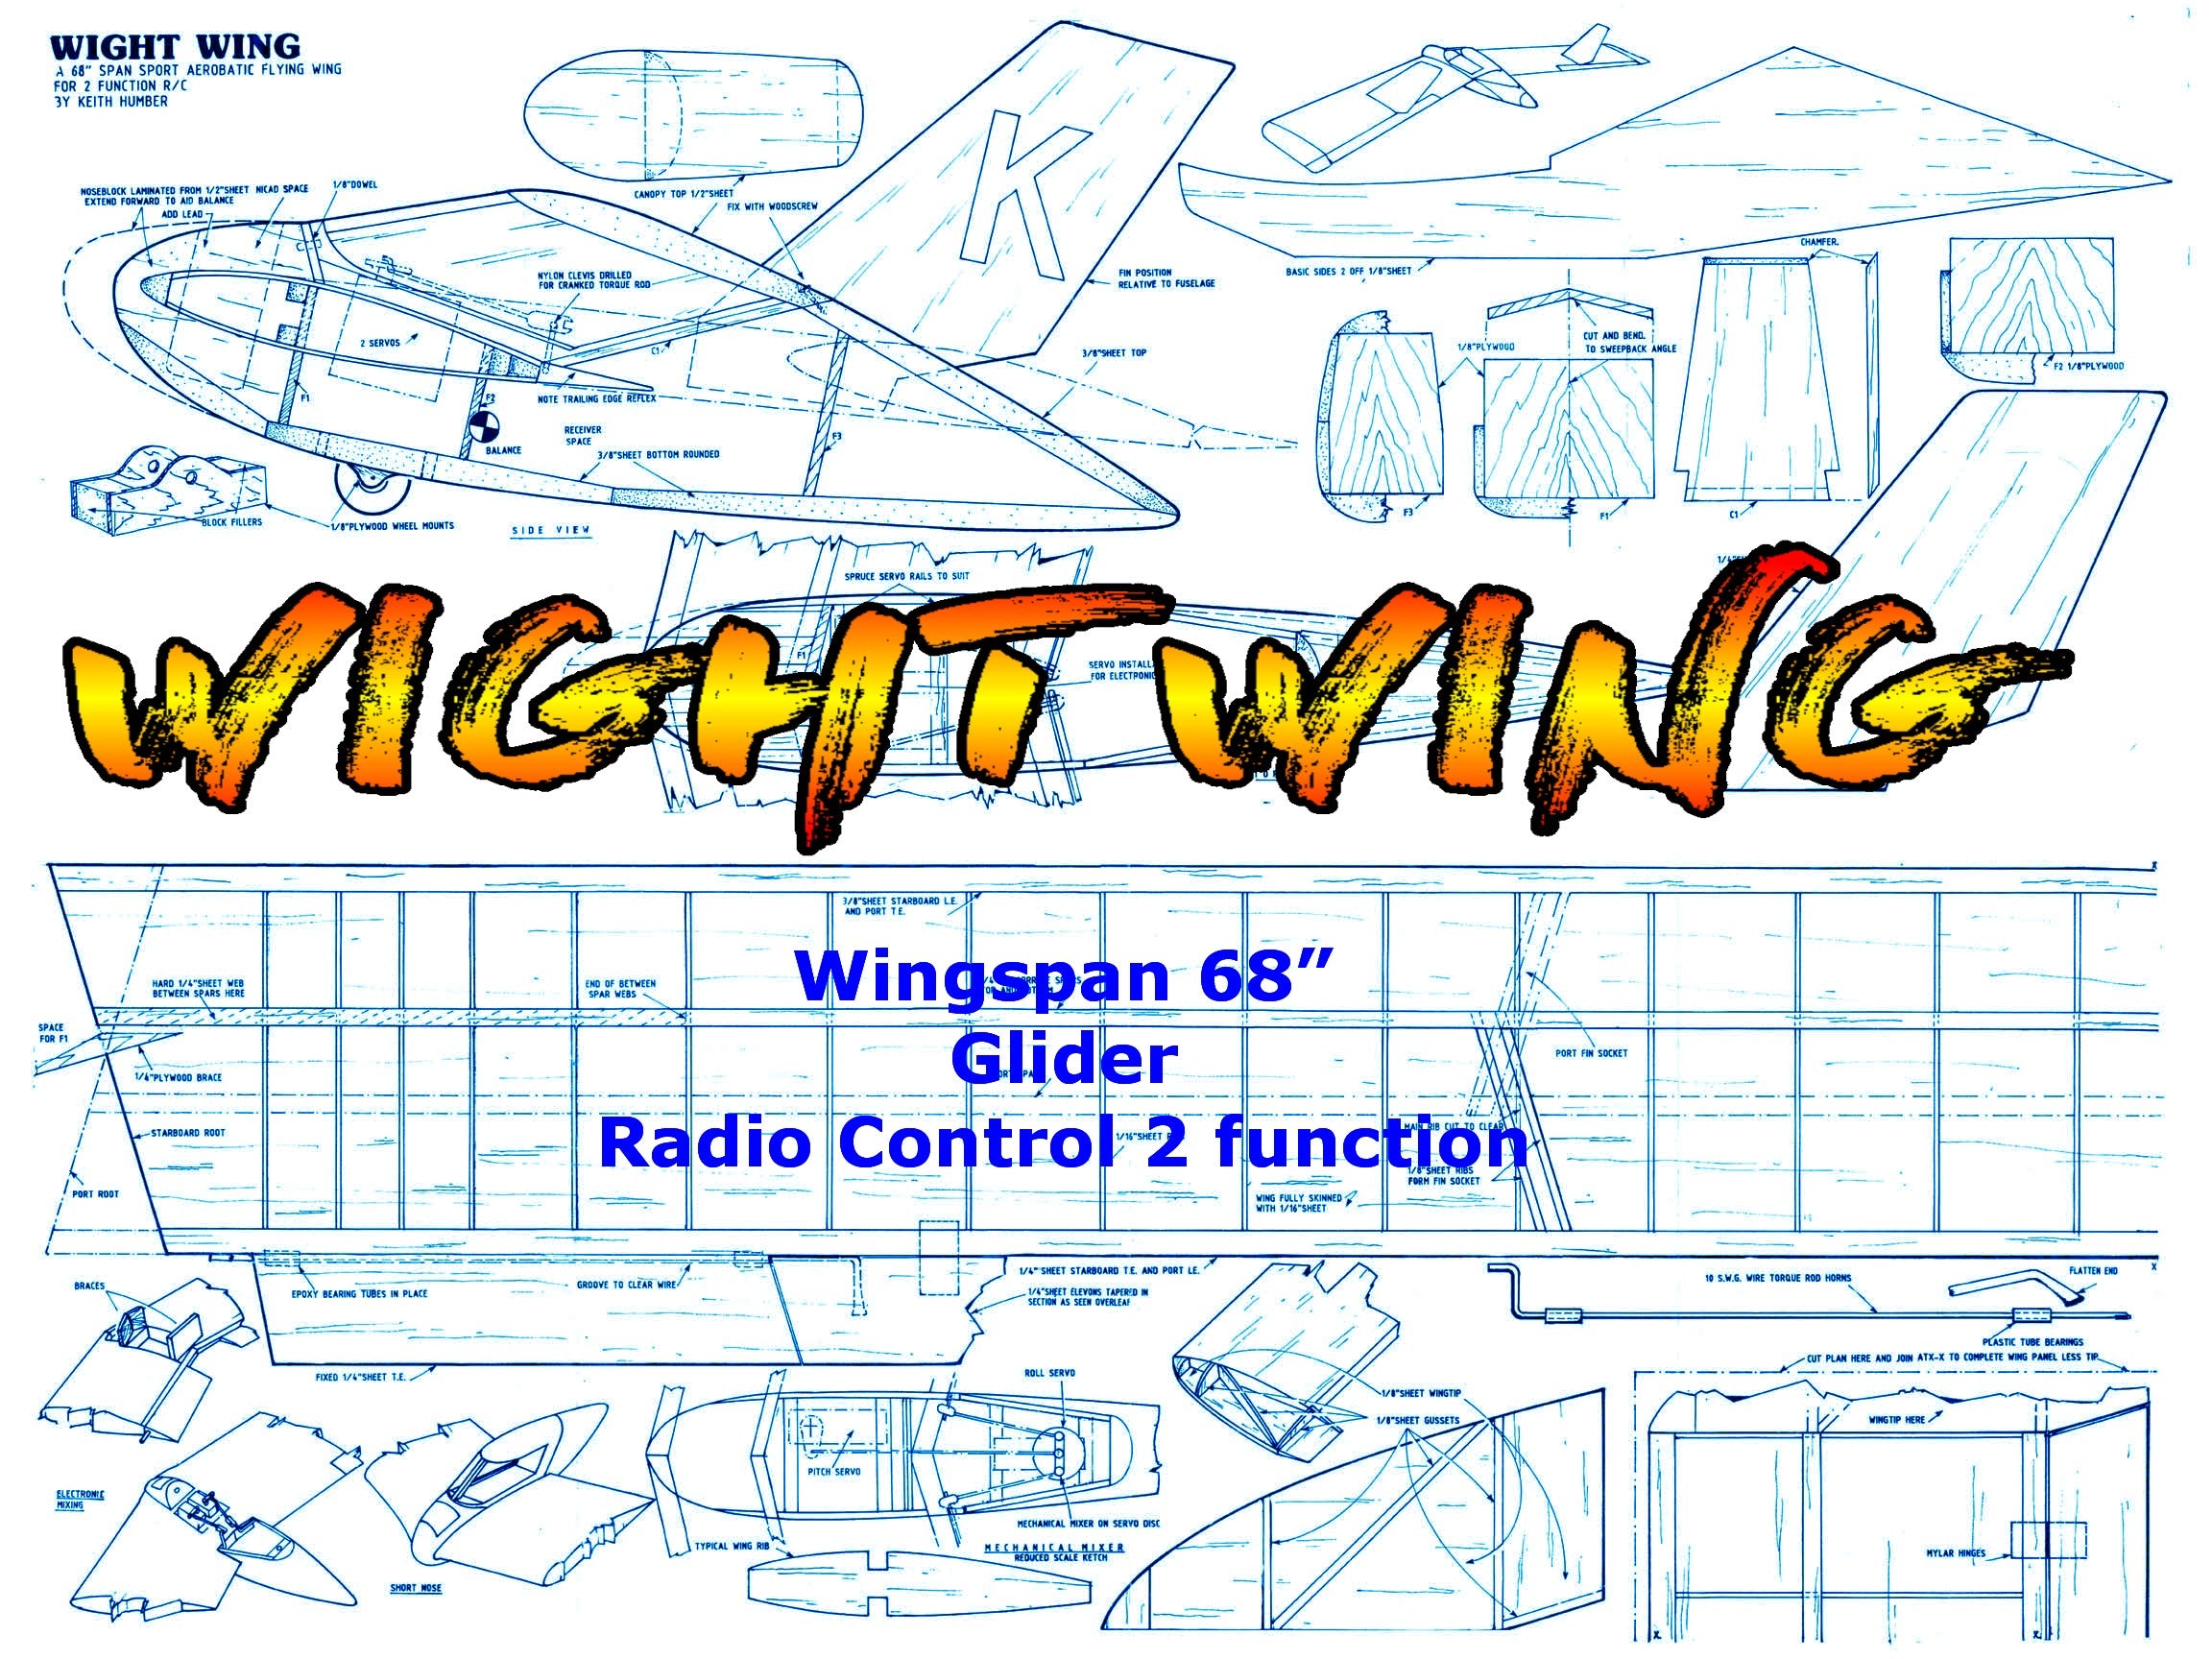 full size printed plan glider wingspan 68” for radio control "wight wing"